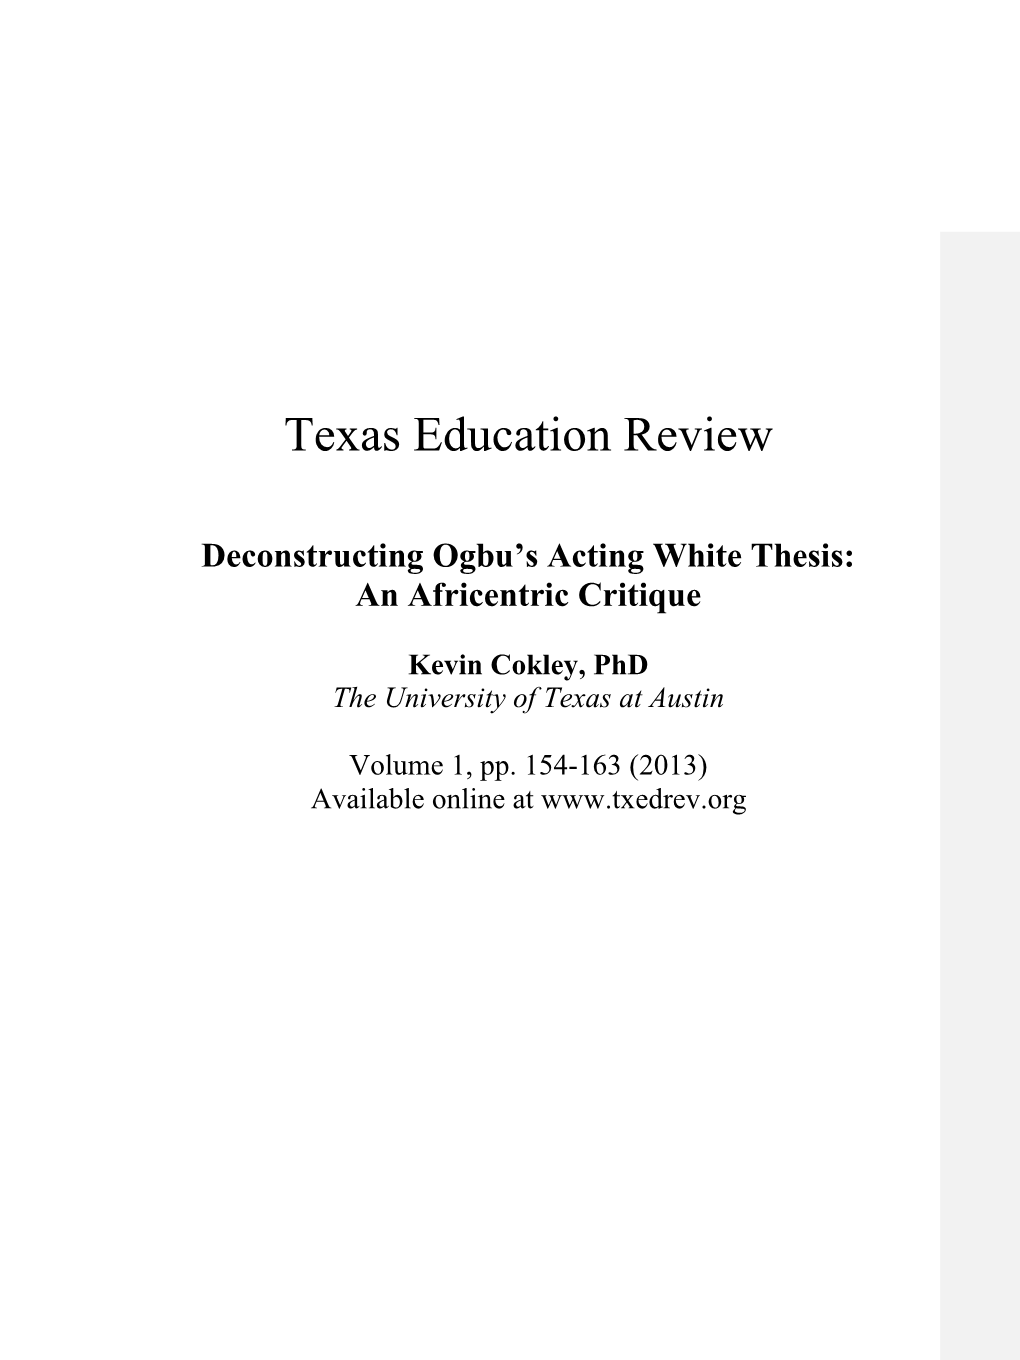 Deconstructing Ogbu's Acting White Thesis: an Africentric Critique